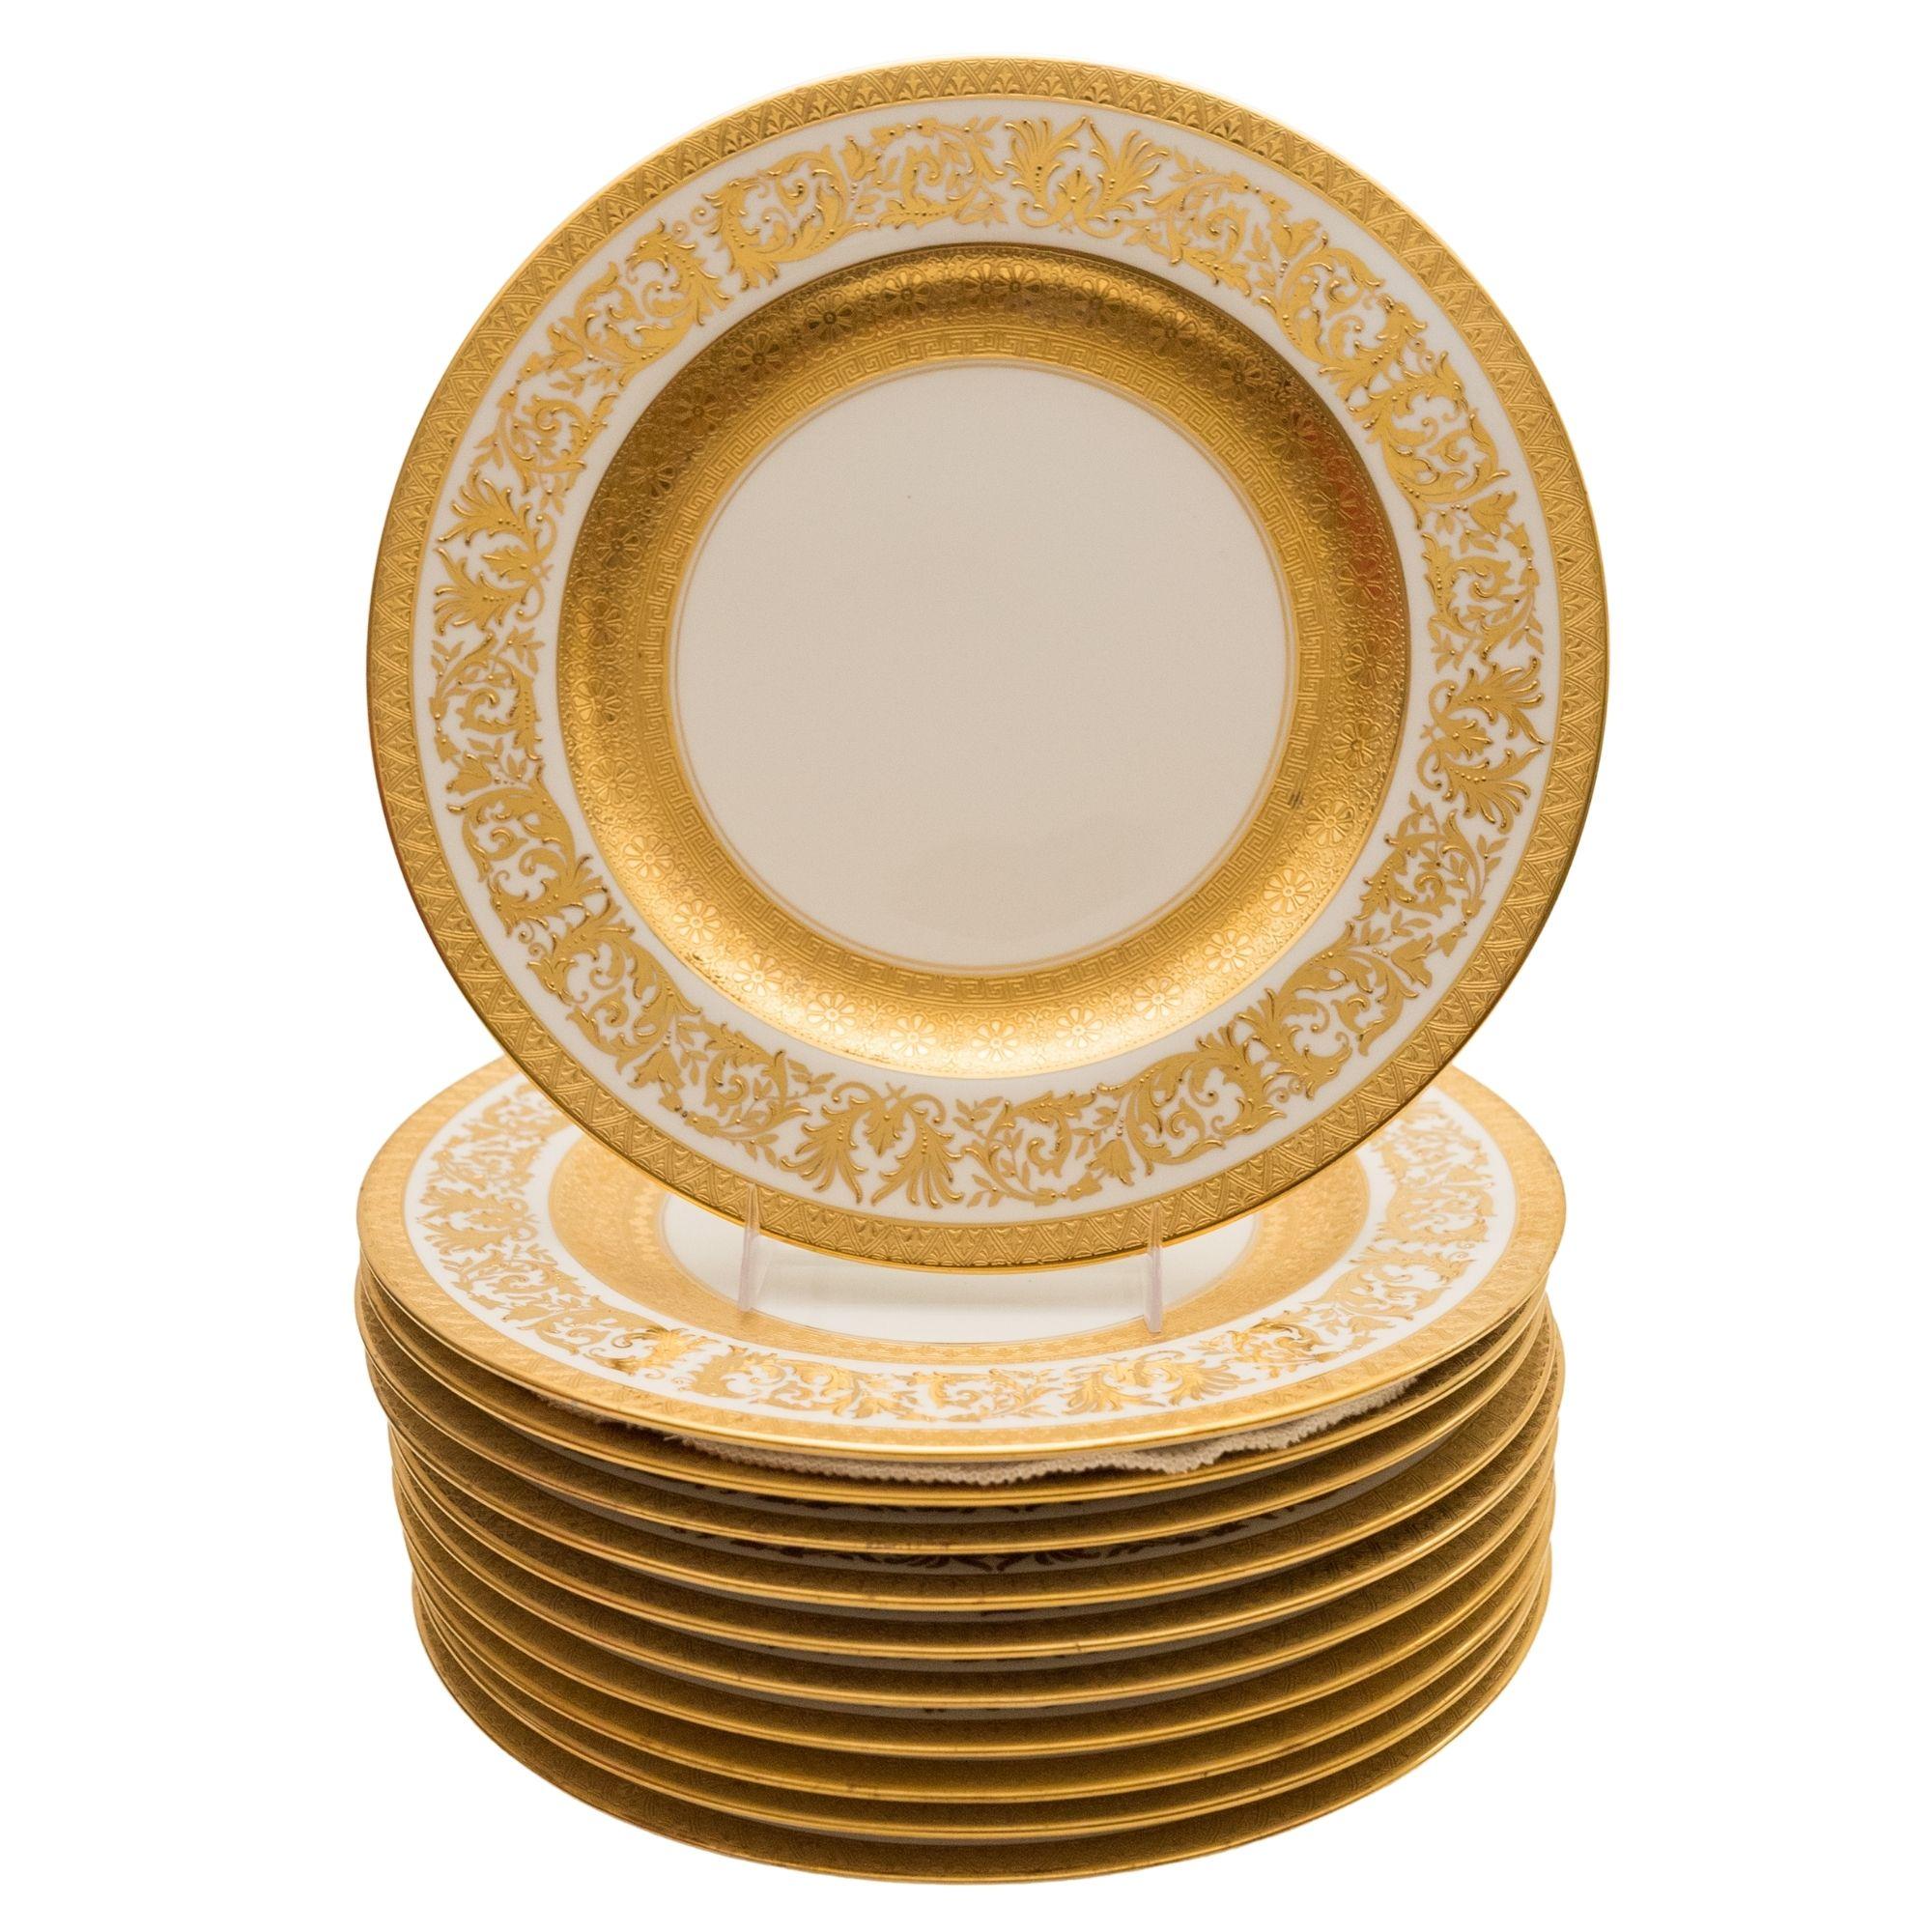 From one of the Gilded Age's finest porcelain manufacturers, Crown Staffordshire is this set of eleven dinner plates. They feature beautiful raised gilt work in their collars and an extra wide gold inner band. Custom ordered through the fine